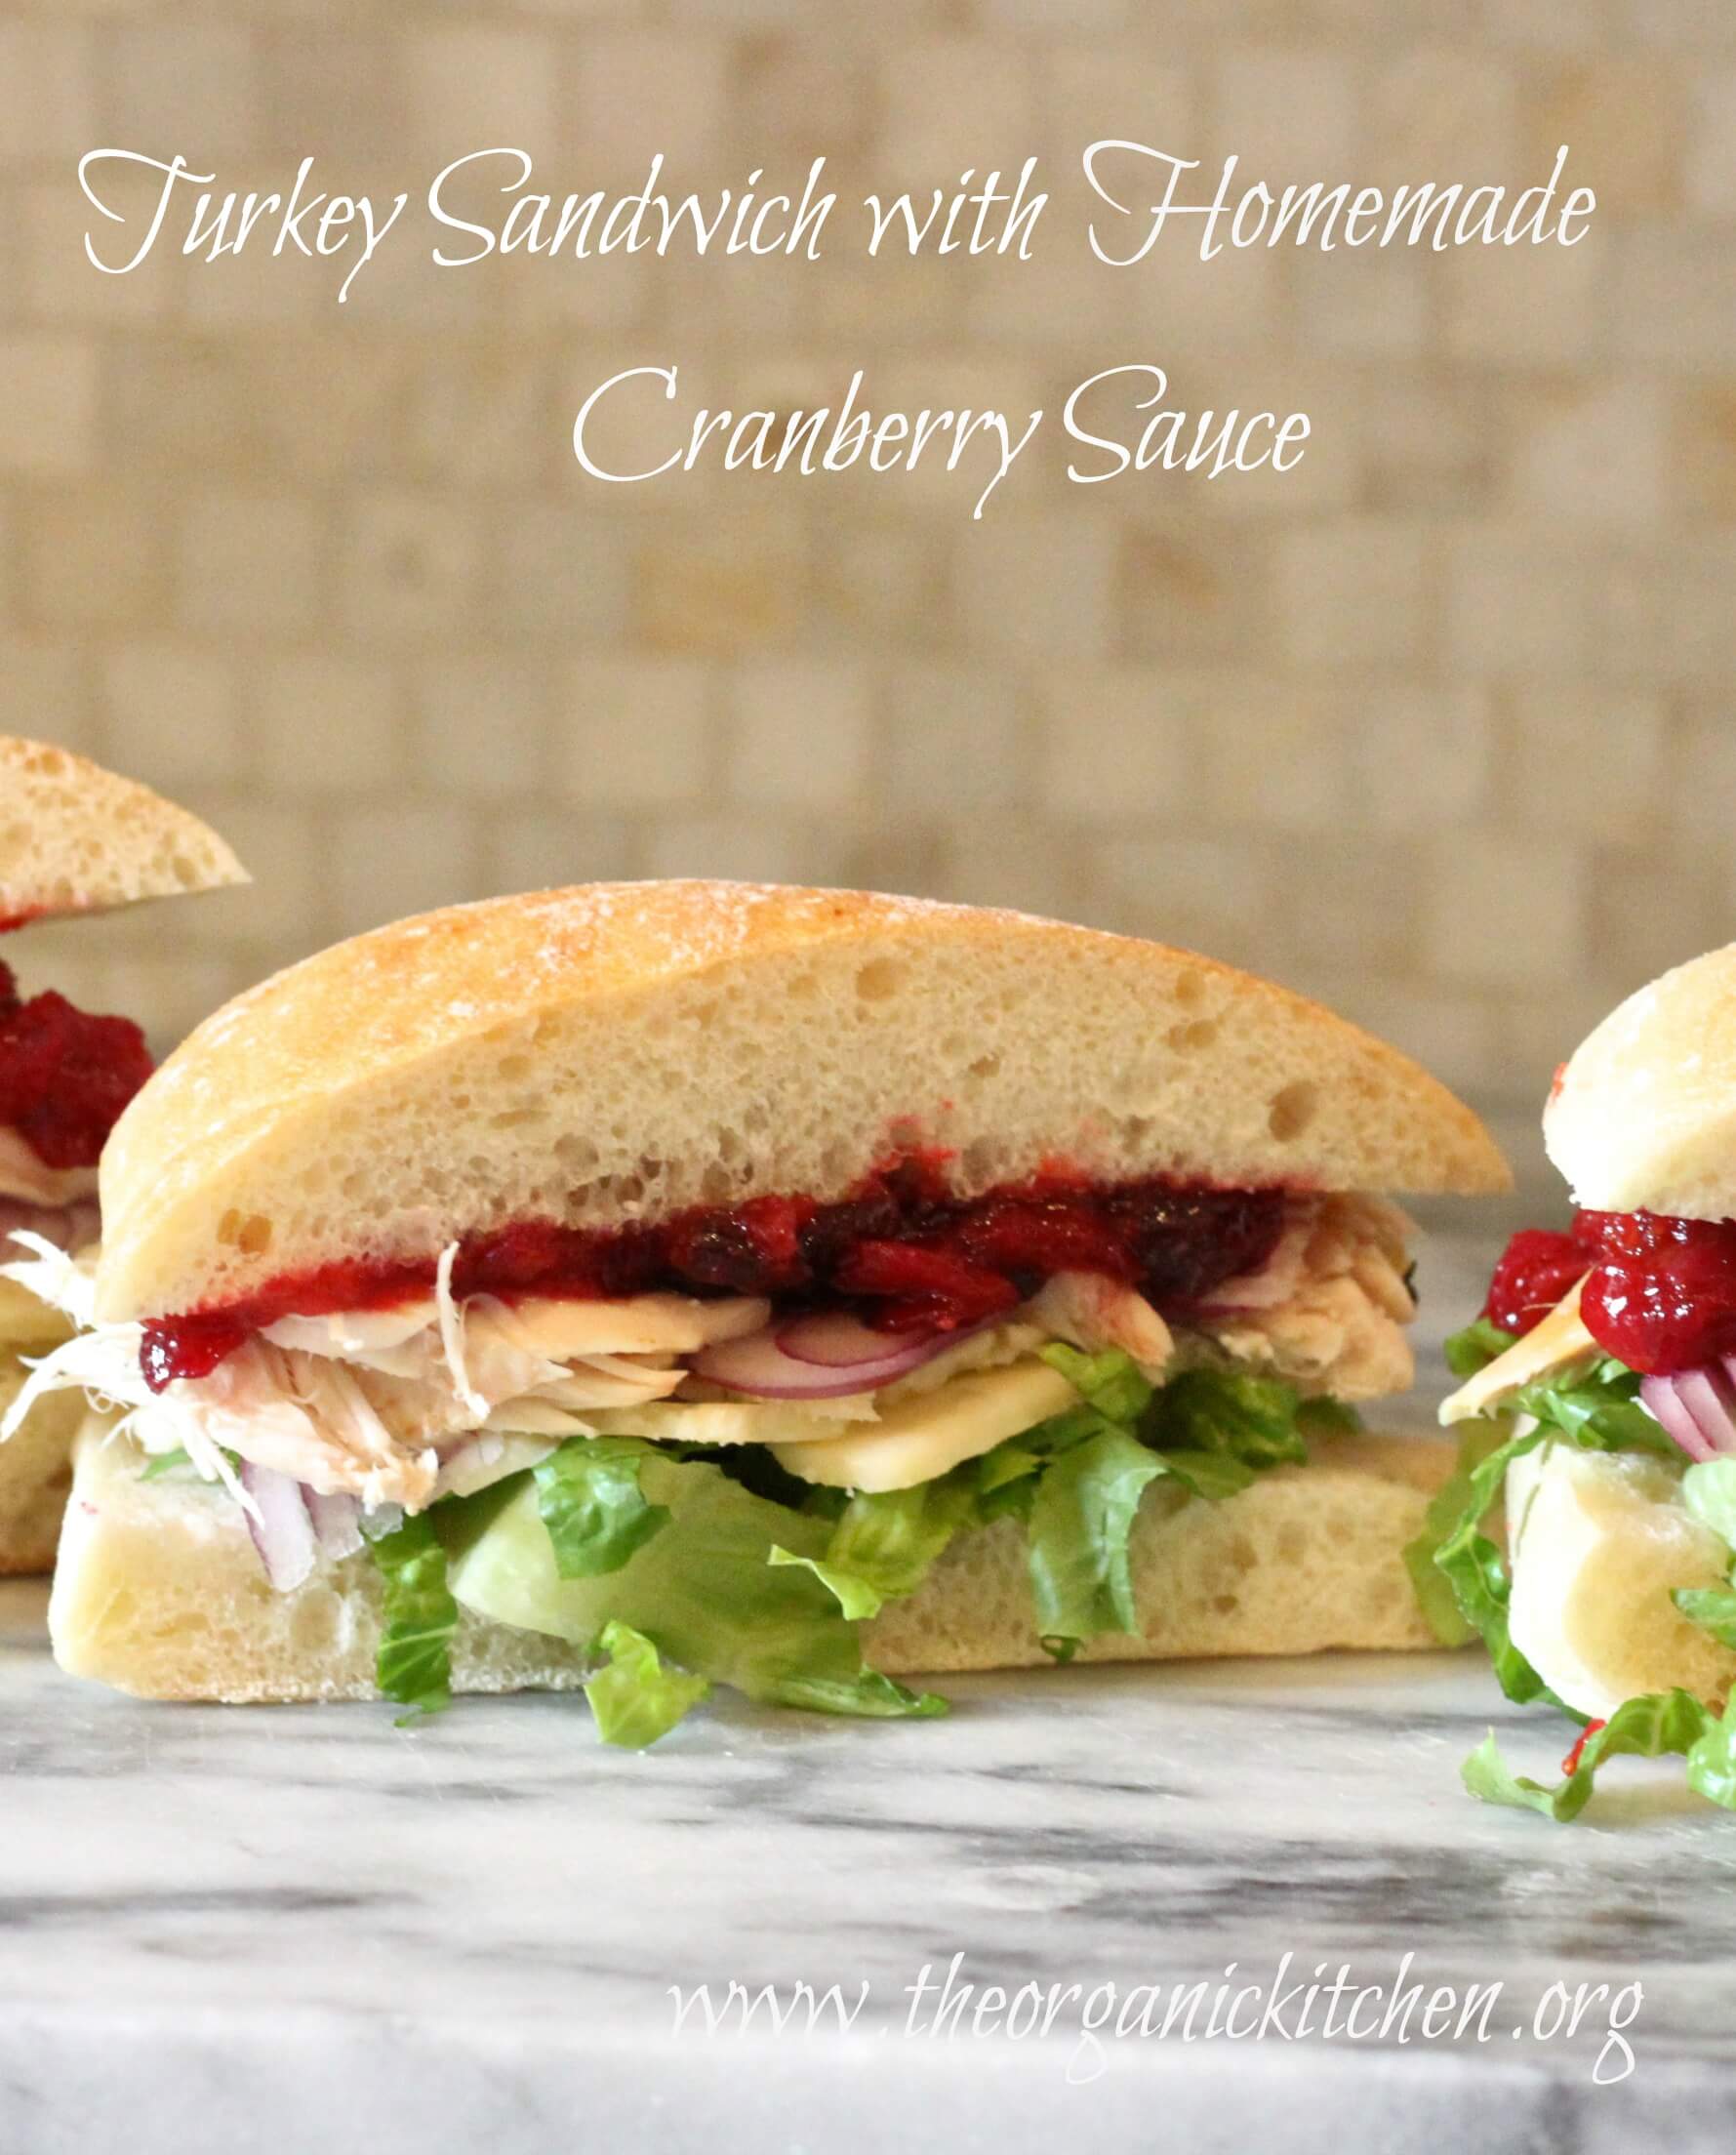 Turkey Sandwich with Homemade Cranberry Sauce from The Organic Kitchen